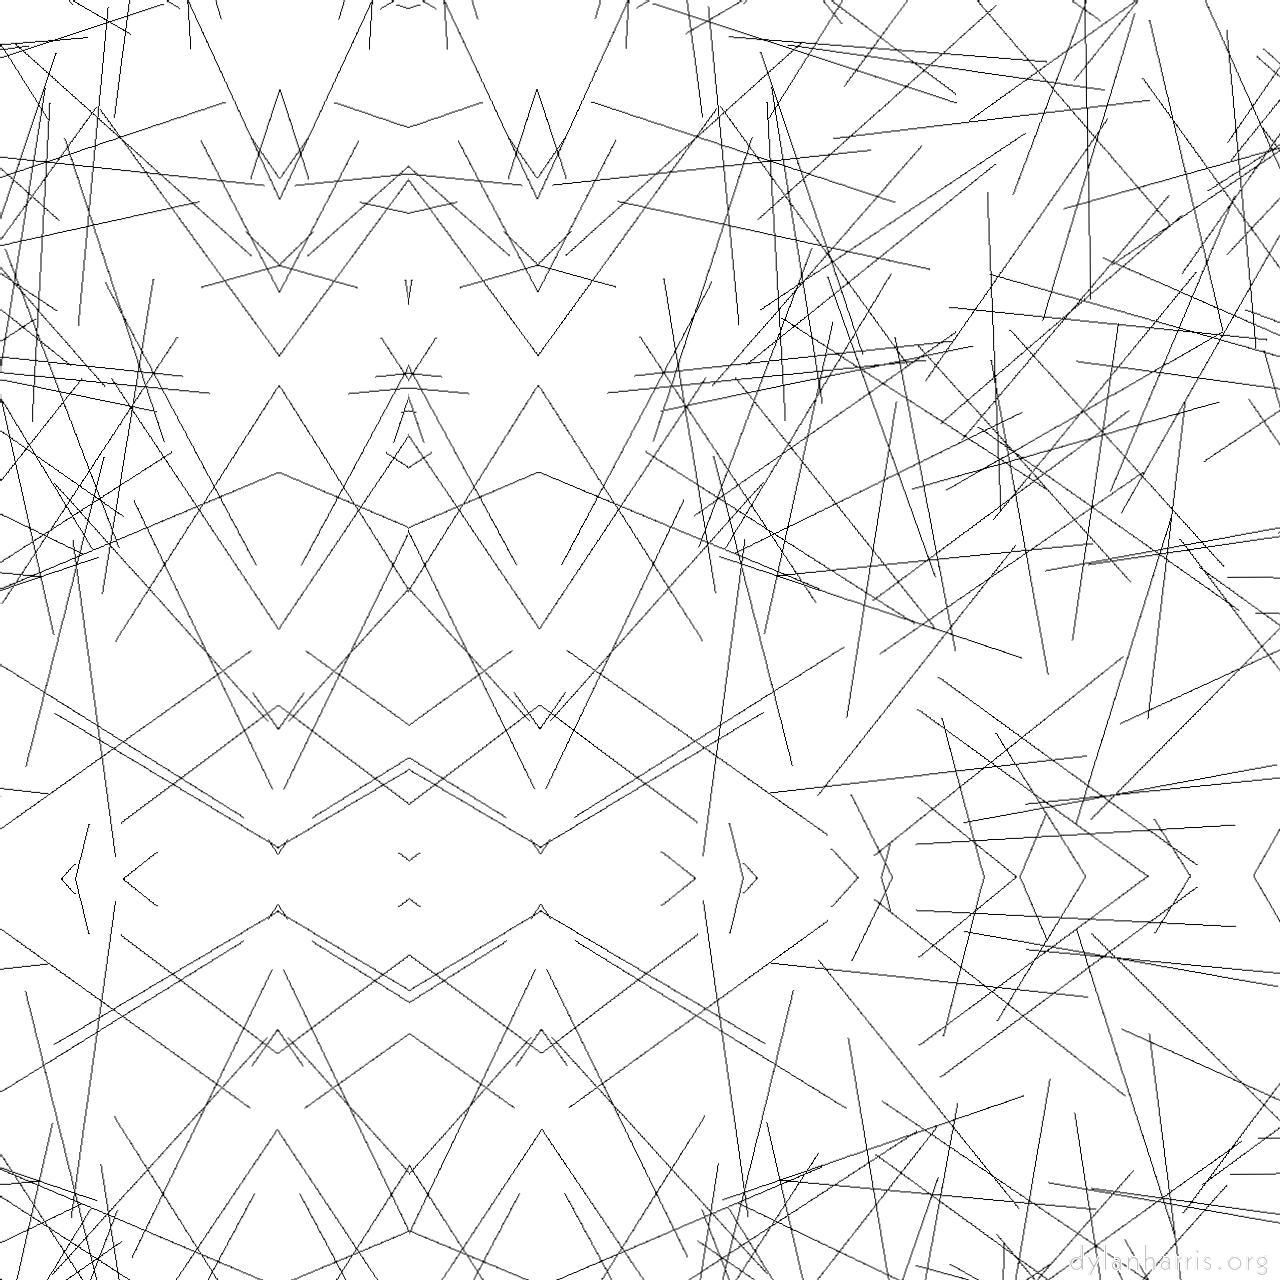 image: variations :: abstract line drawing 1